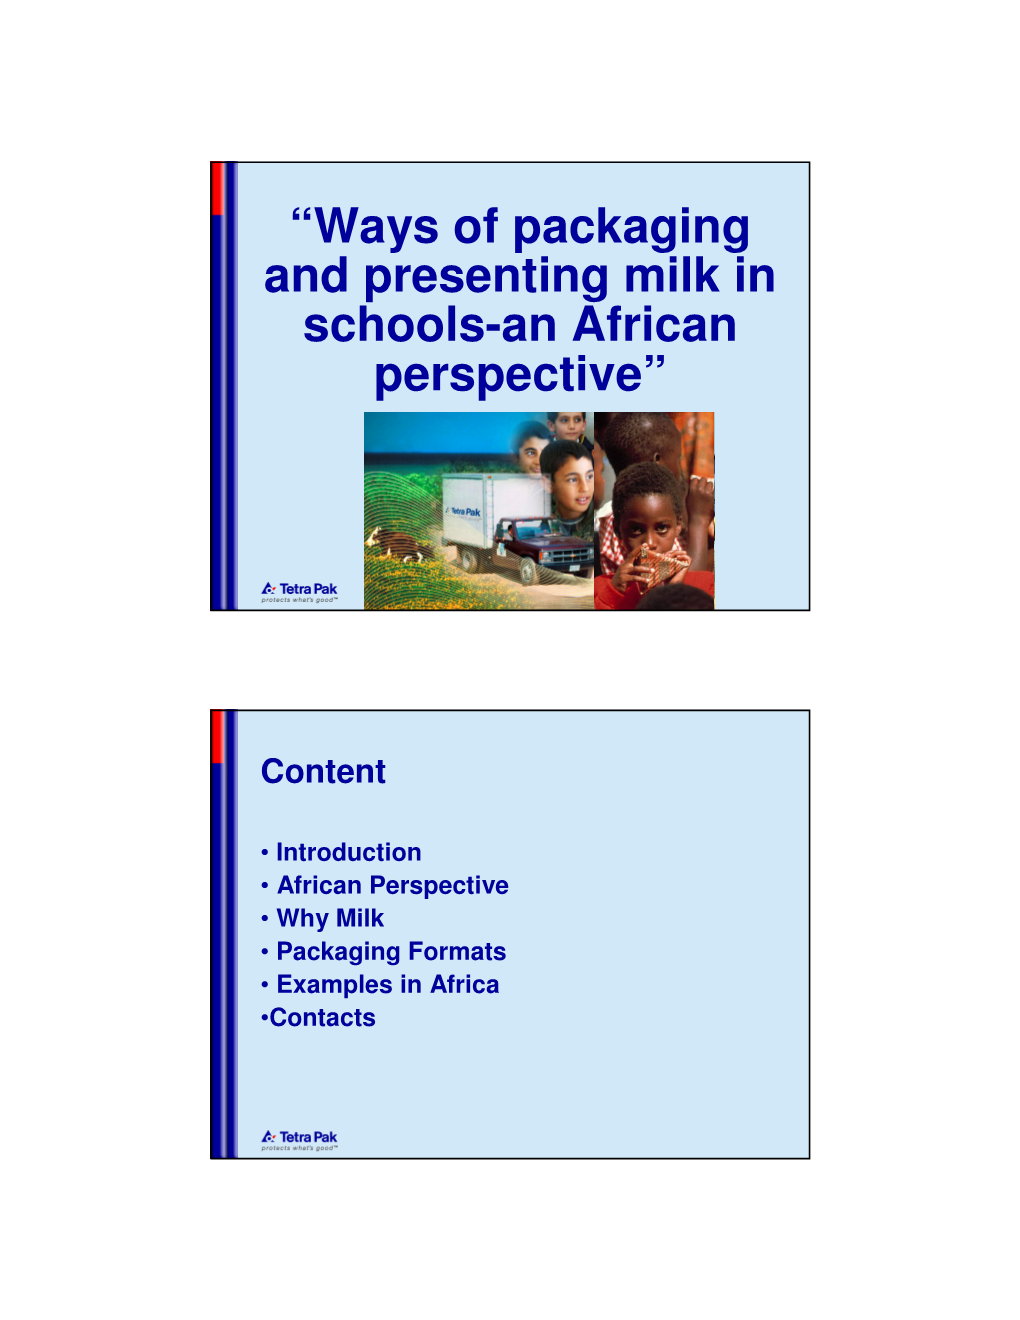 Ways of Packaging and Presenting Milk in Schools-An African Perspective”